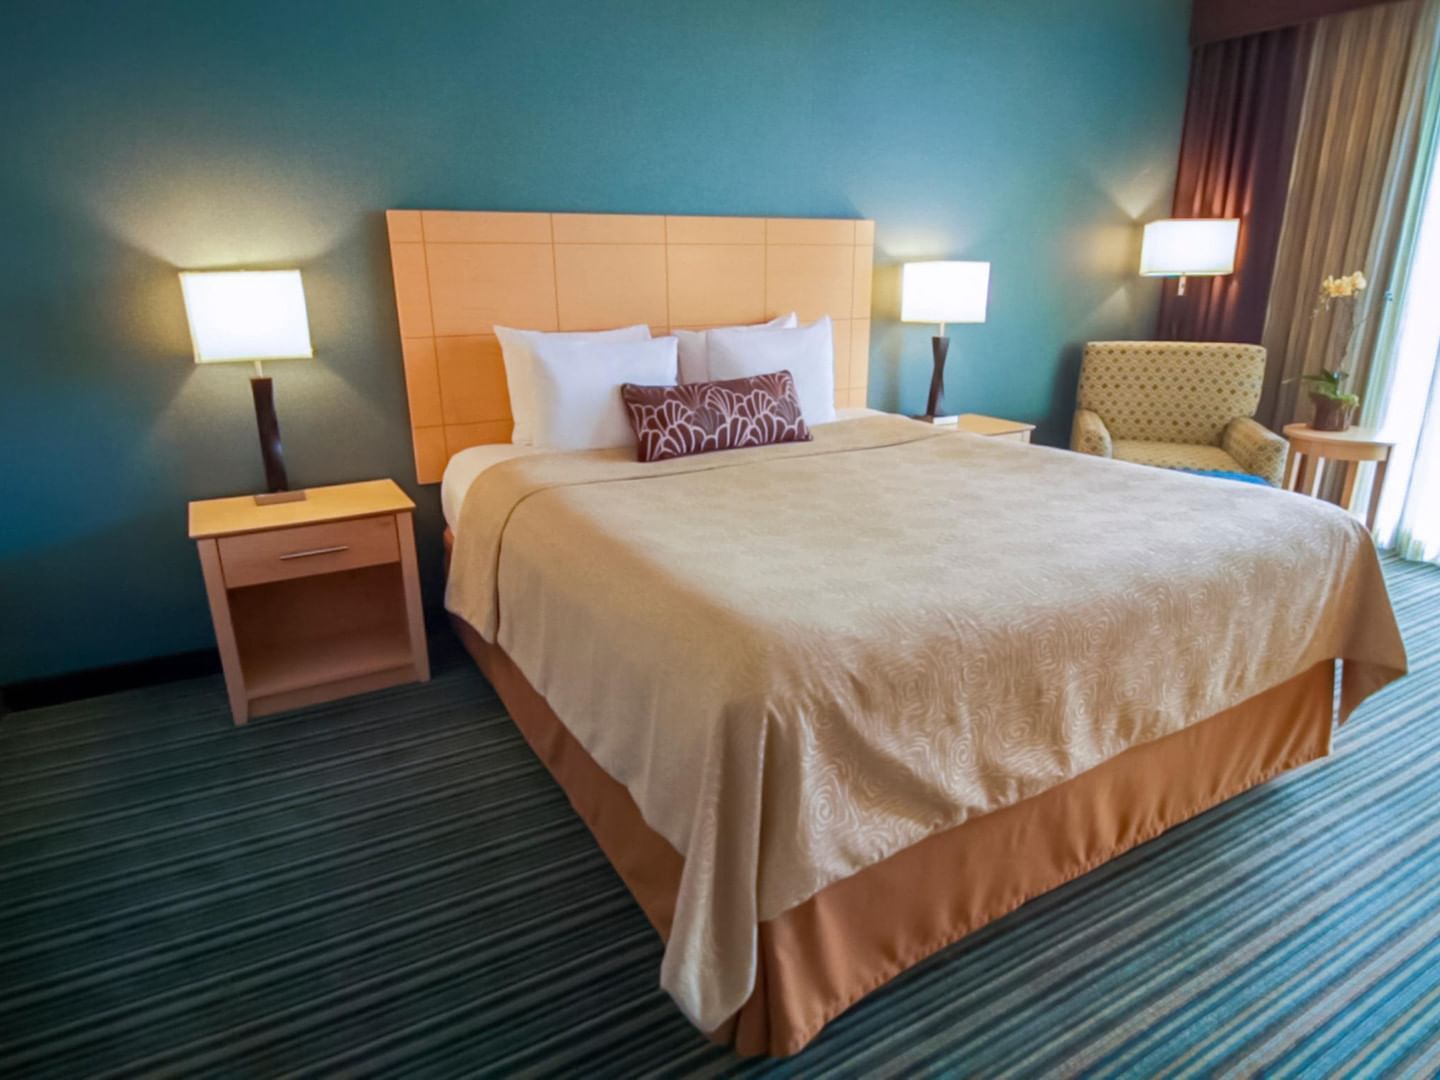 Double bed with nightstands at Inn by the Sea at La Jolla